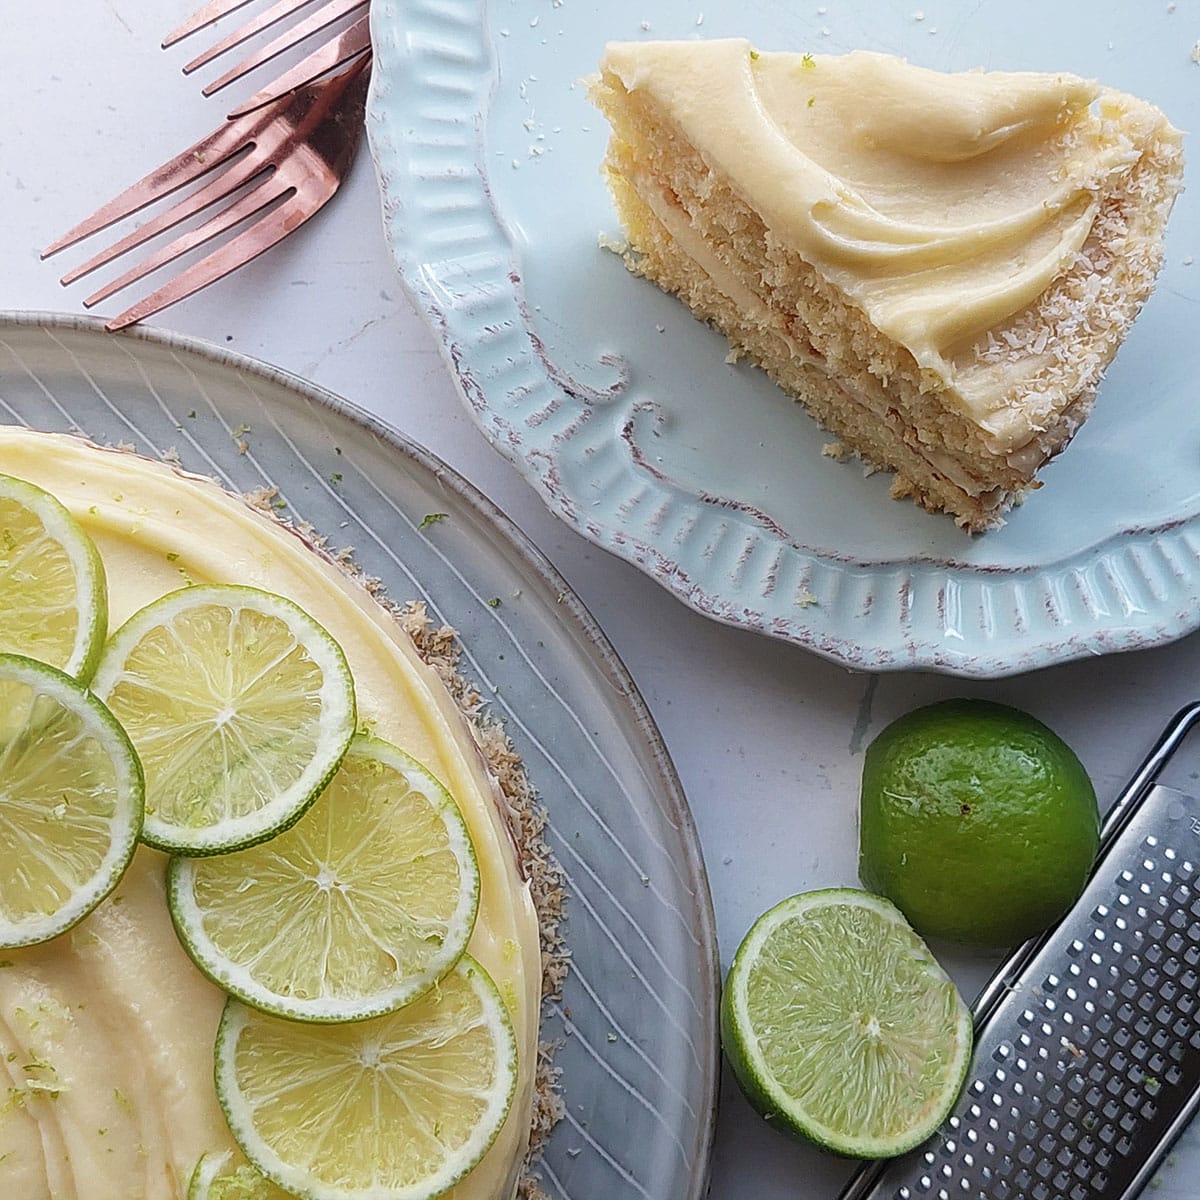 This Coconut Lemon Cake is a classic bake that simply can't be beat! With its sweet coconut flavor combined with zesty lemon, it's the perfect bake for any occasion.